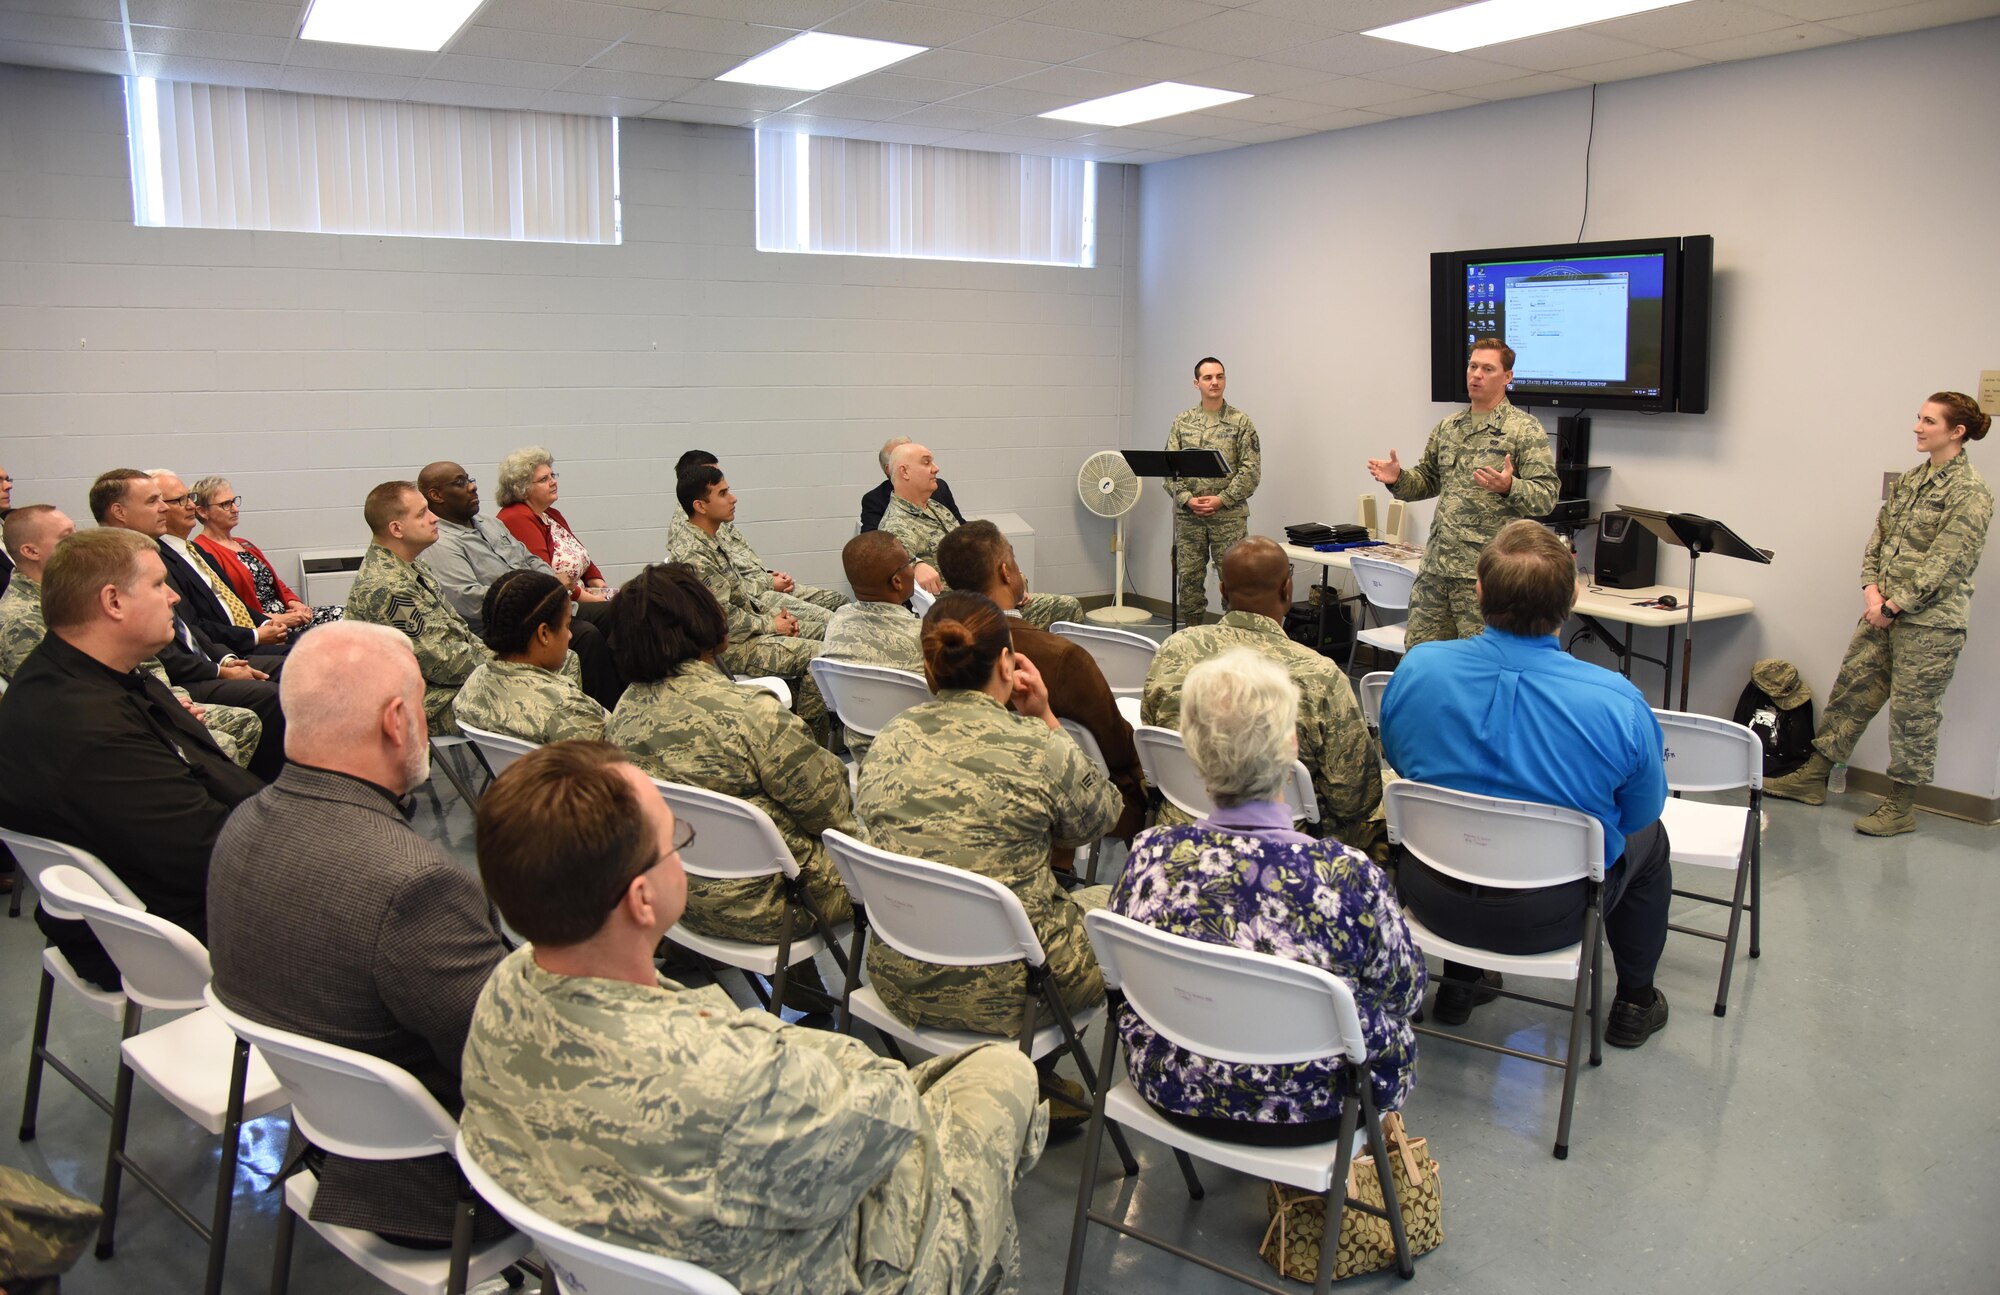 Col. C. Mike Smith, 81st Training Wing vice commander, welcomes guests to the Larcher Chapel during a Clergy Day event Jan. 26, 2017, on Keesler Air Force Base, Miss. Local religious organizations visited Keesler to build a stronger relationship with members of the 81st TRW Chapel. The event included lunch, a tour of the Fishbowl inside the Levitow Training Support Facility and the Keesler Medical Center. (U.S. Air Force photo by Kemberly Groue)